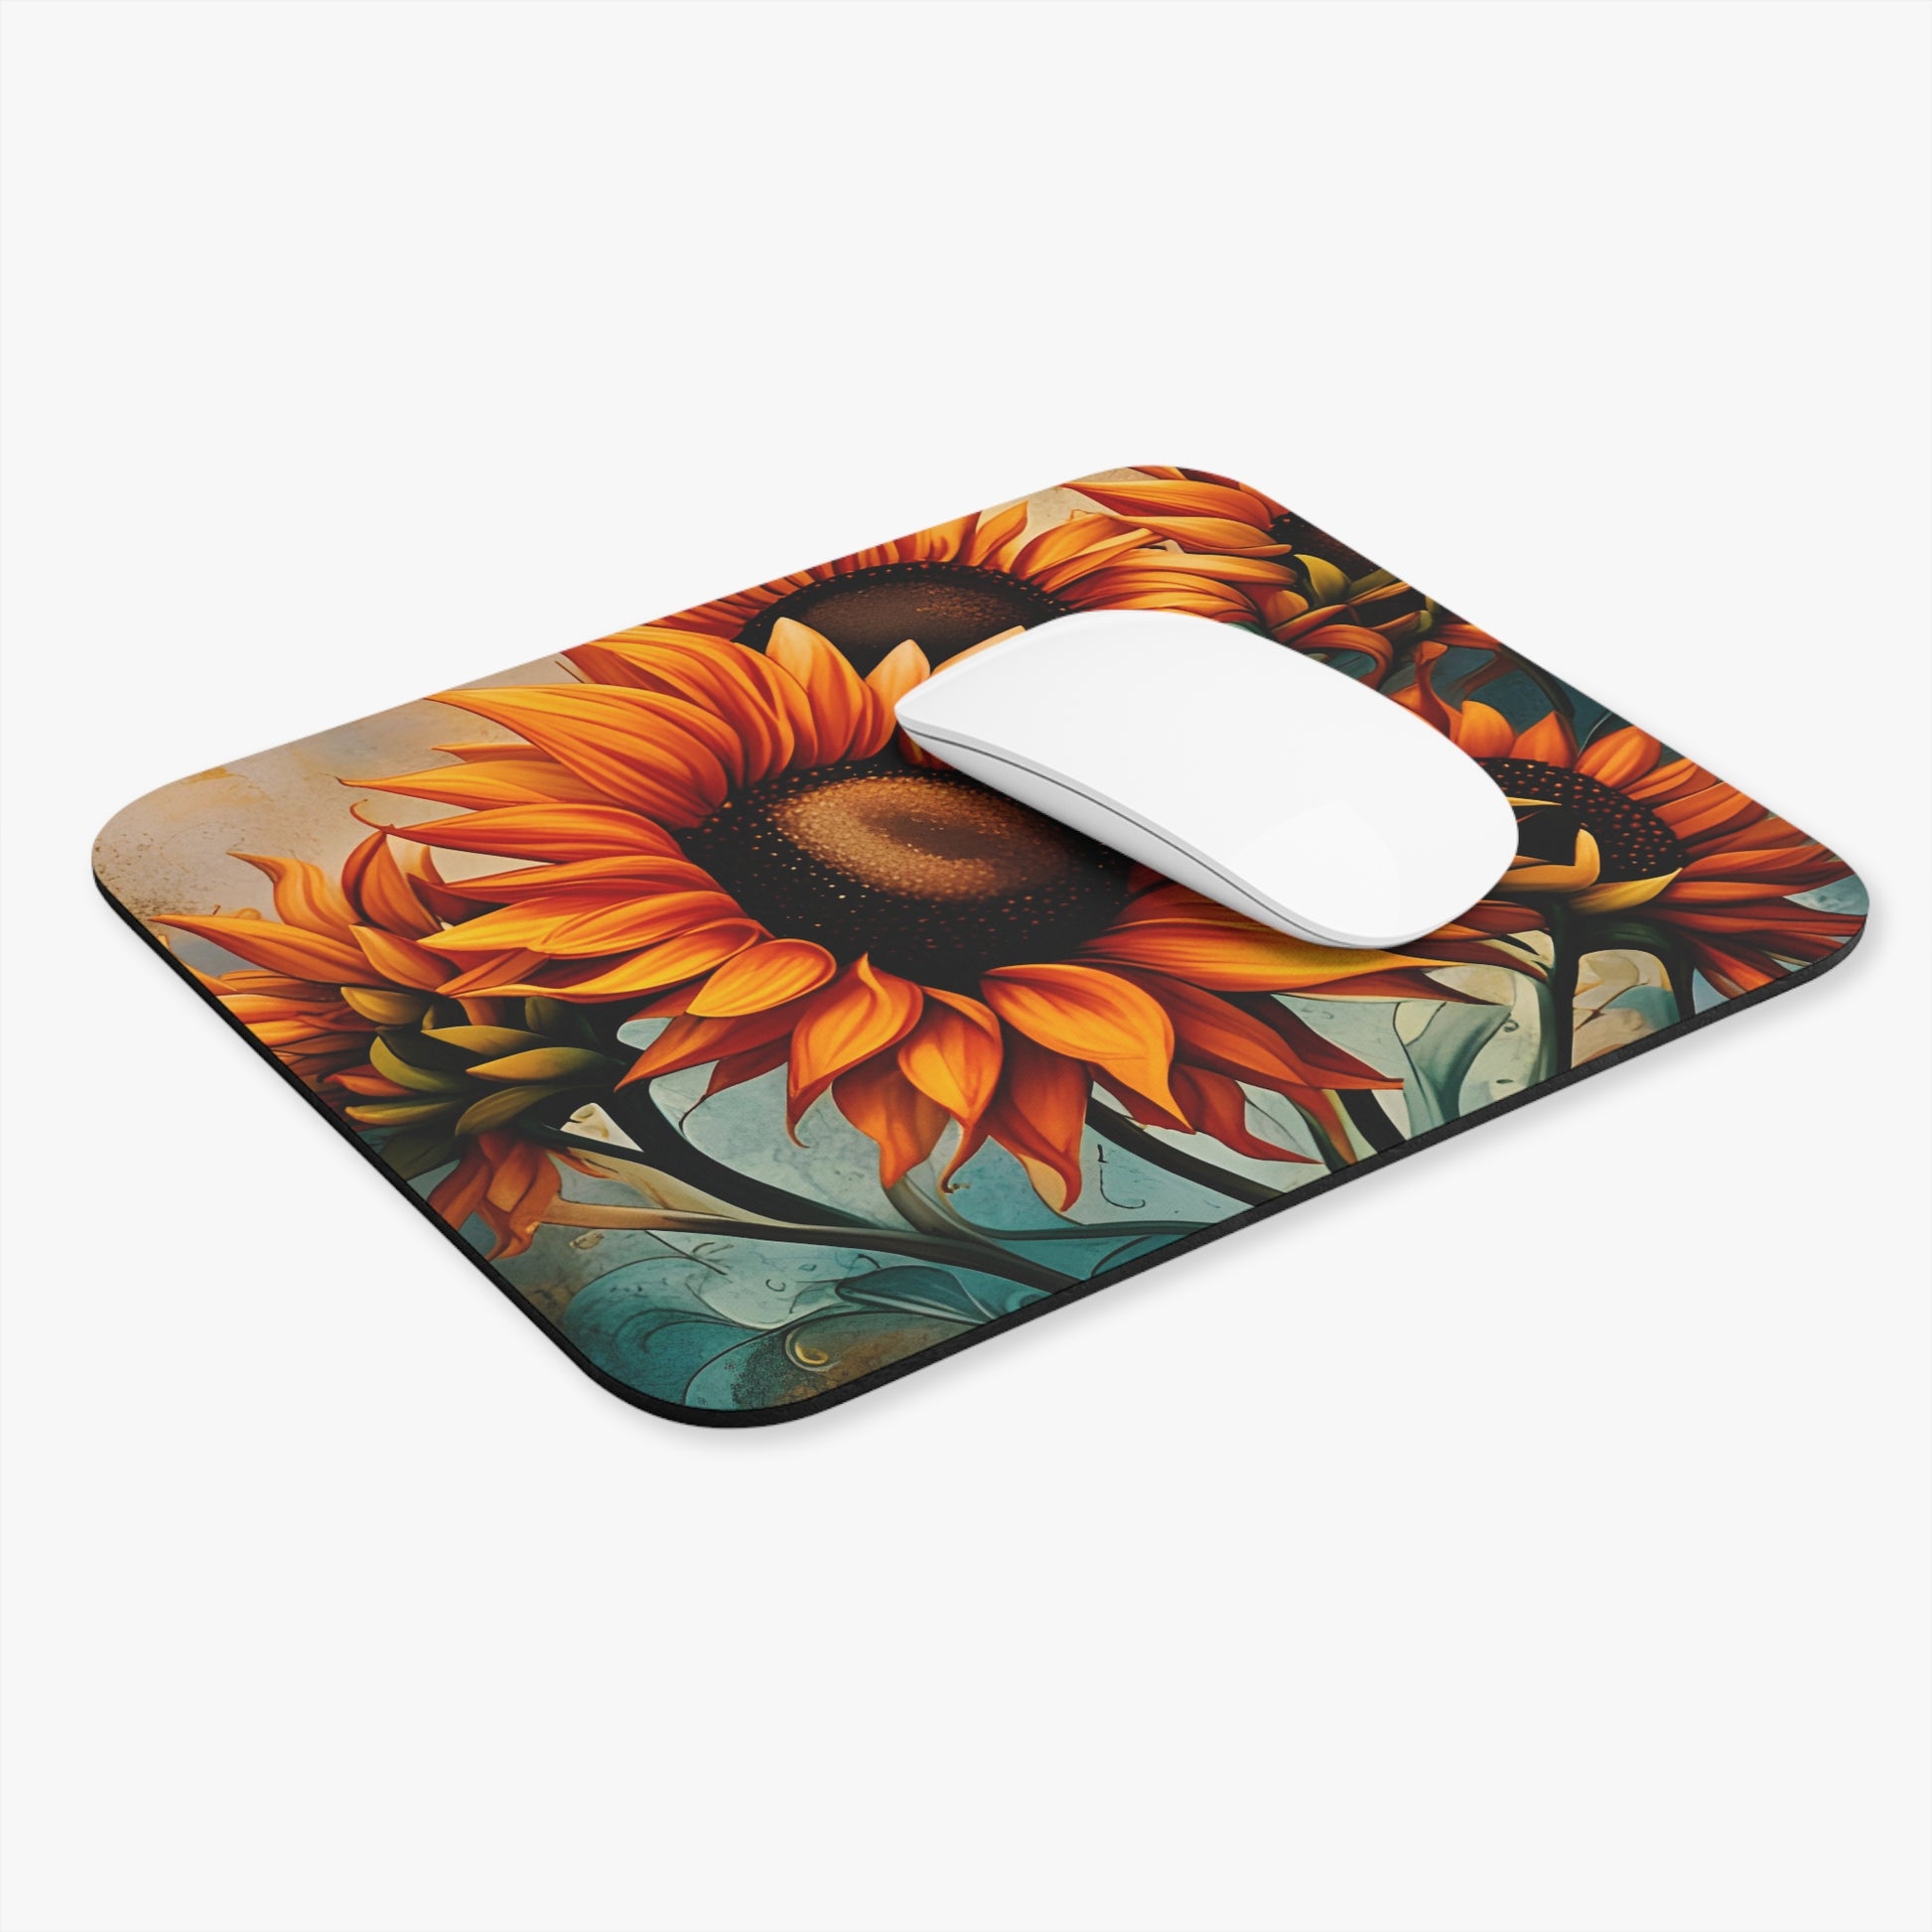 Sunflower Crop on Distressed Blue and Copper Background Printed on Mouse Pad with mouse